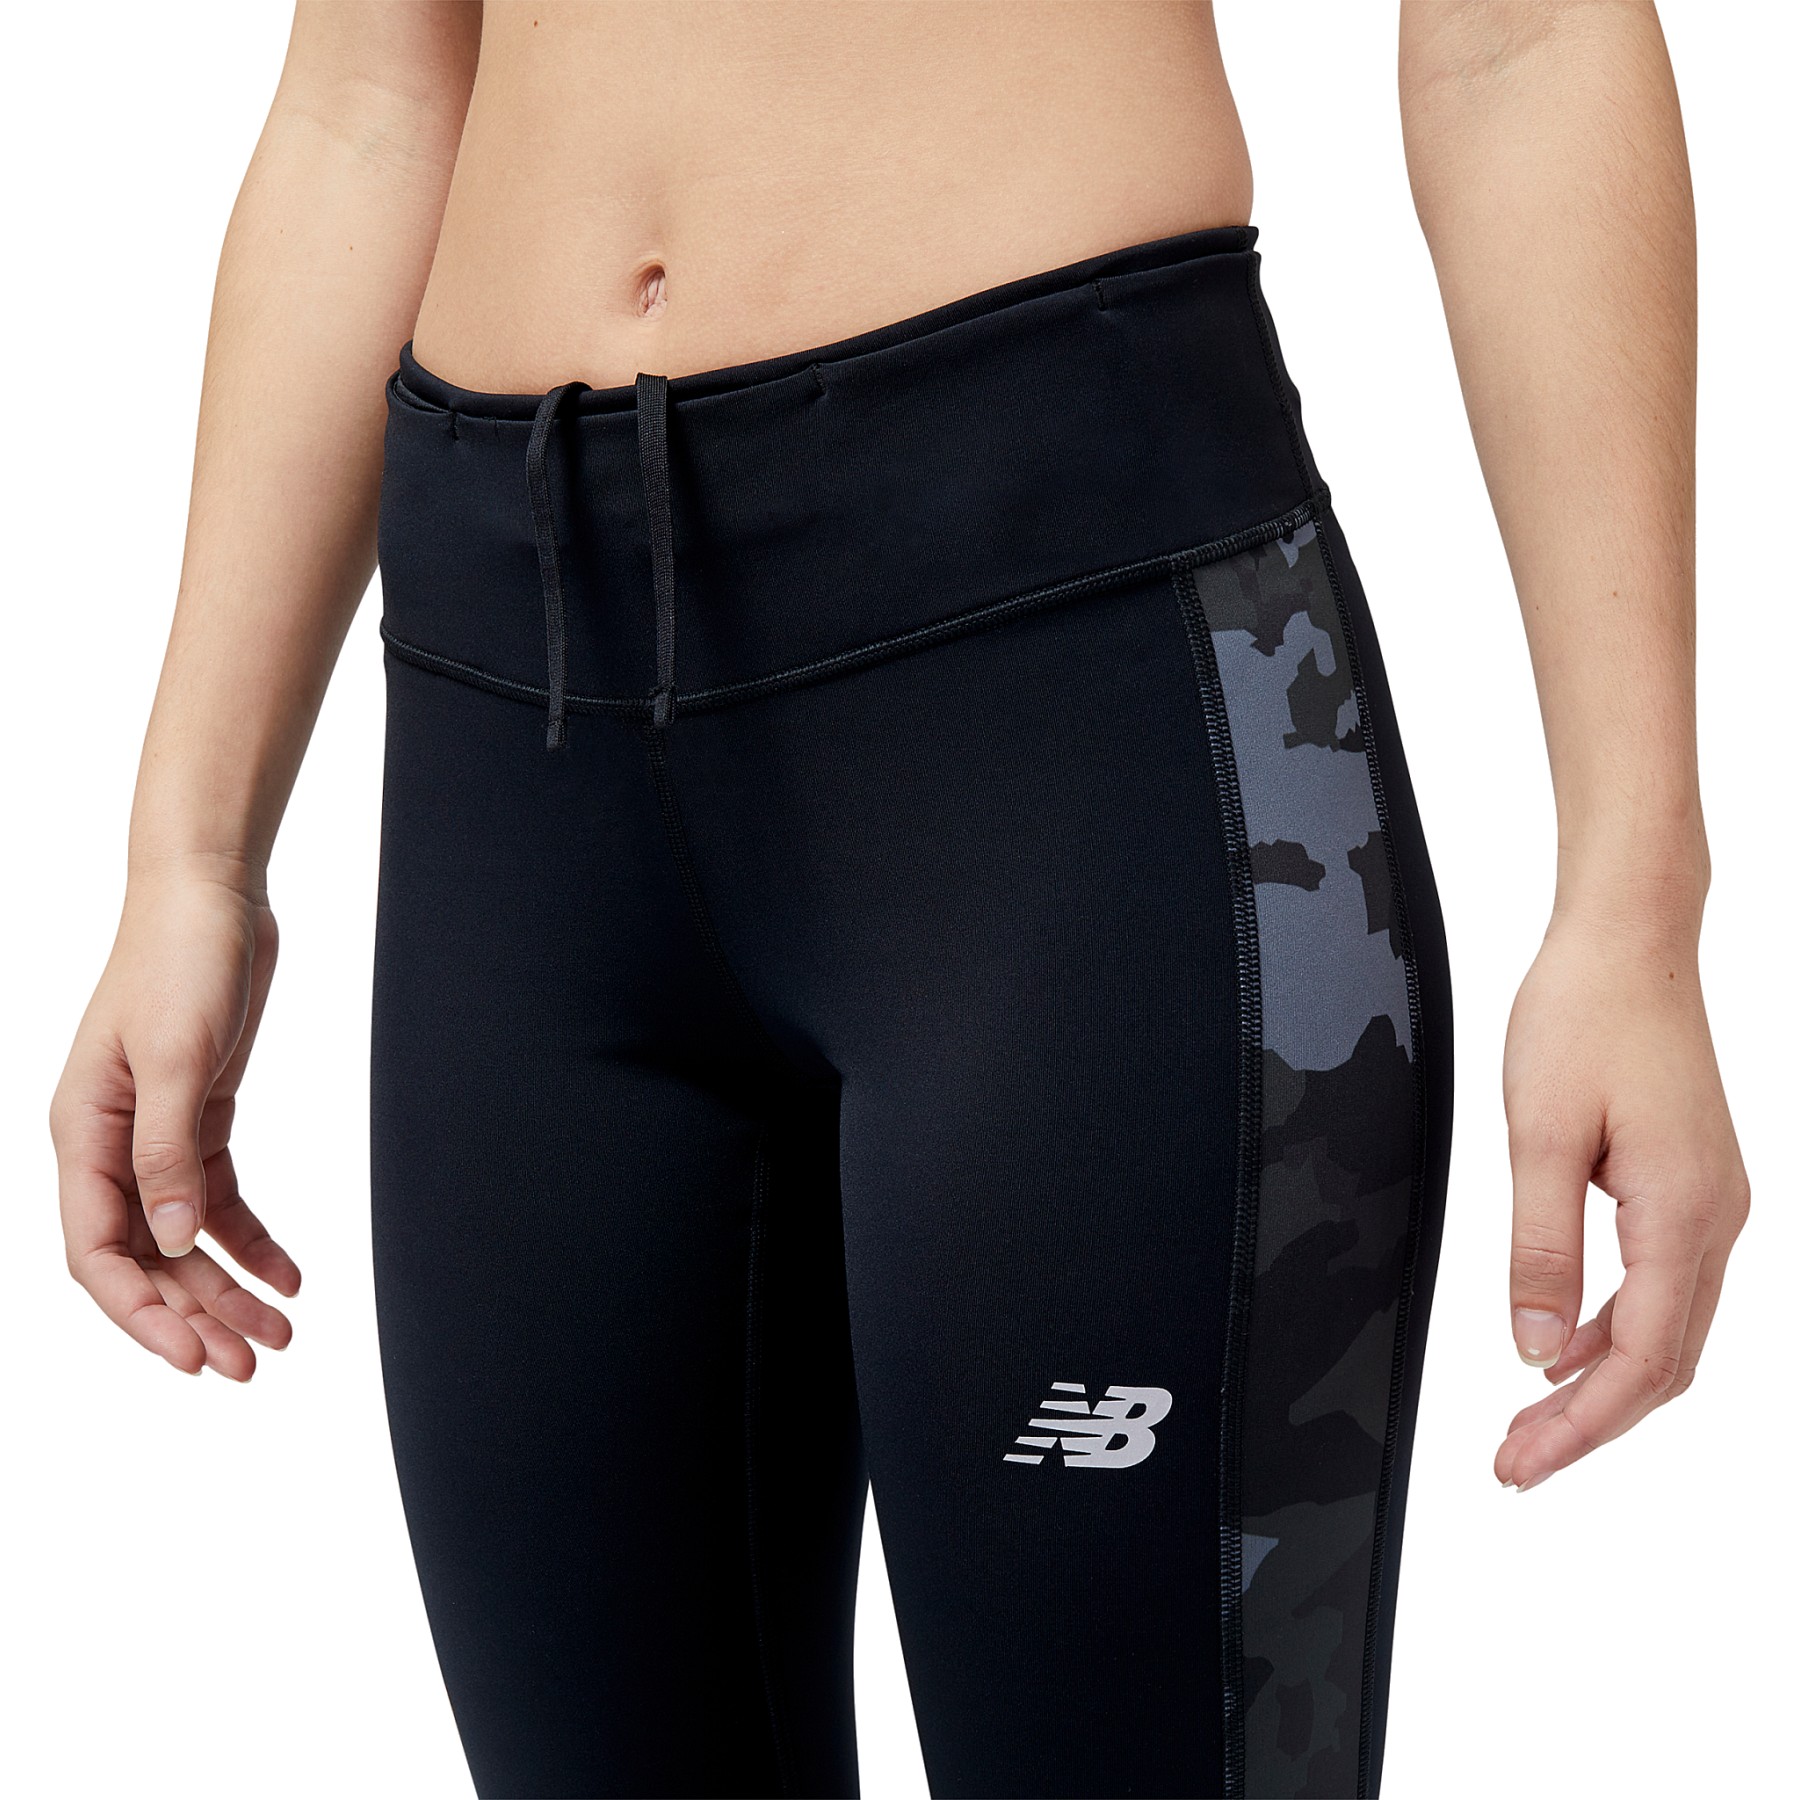 New Balance Reflective Print Accelerate Womens Running Tights